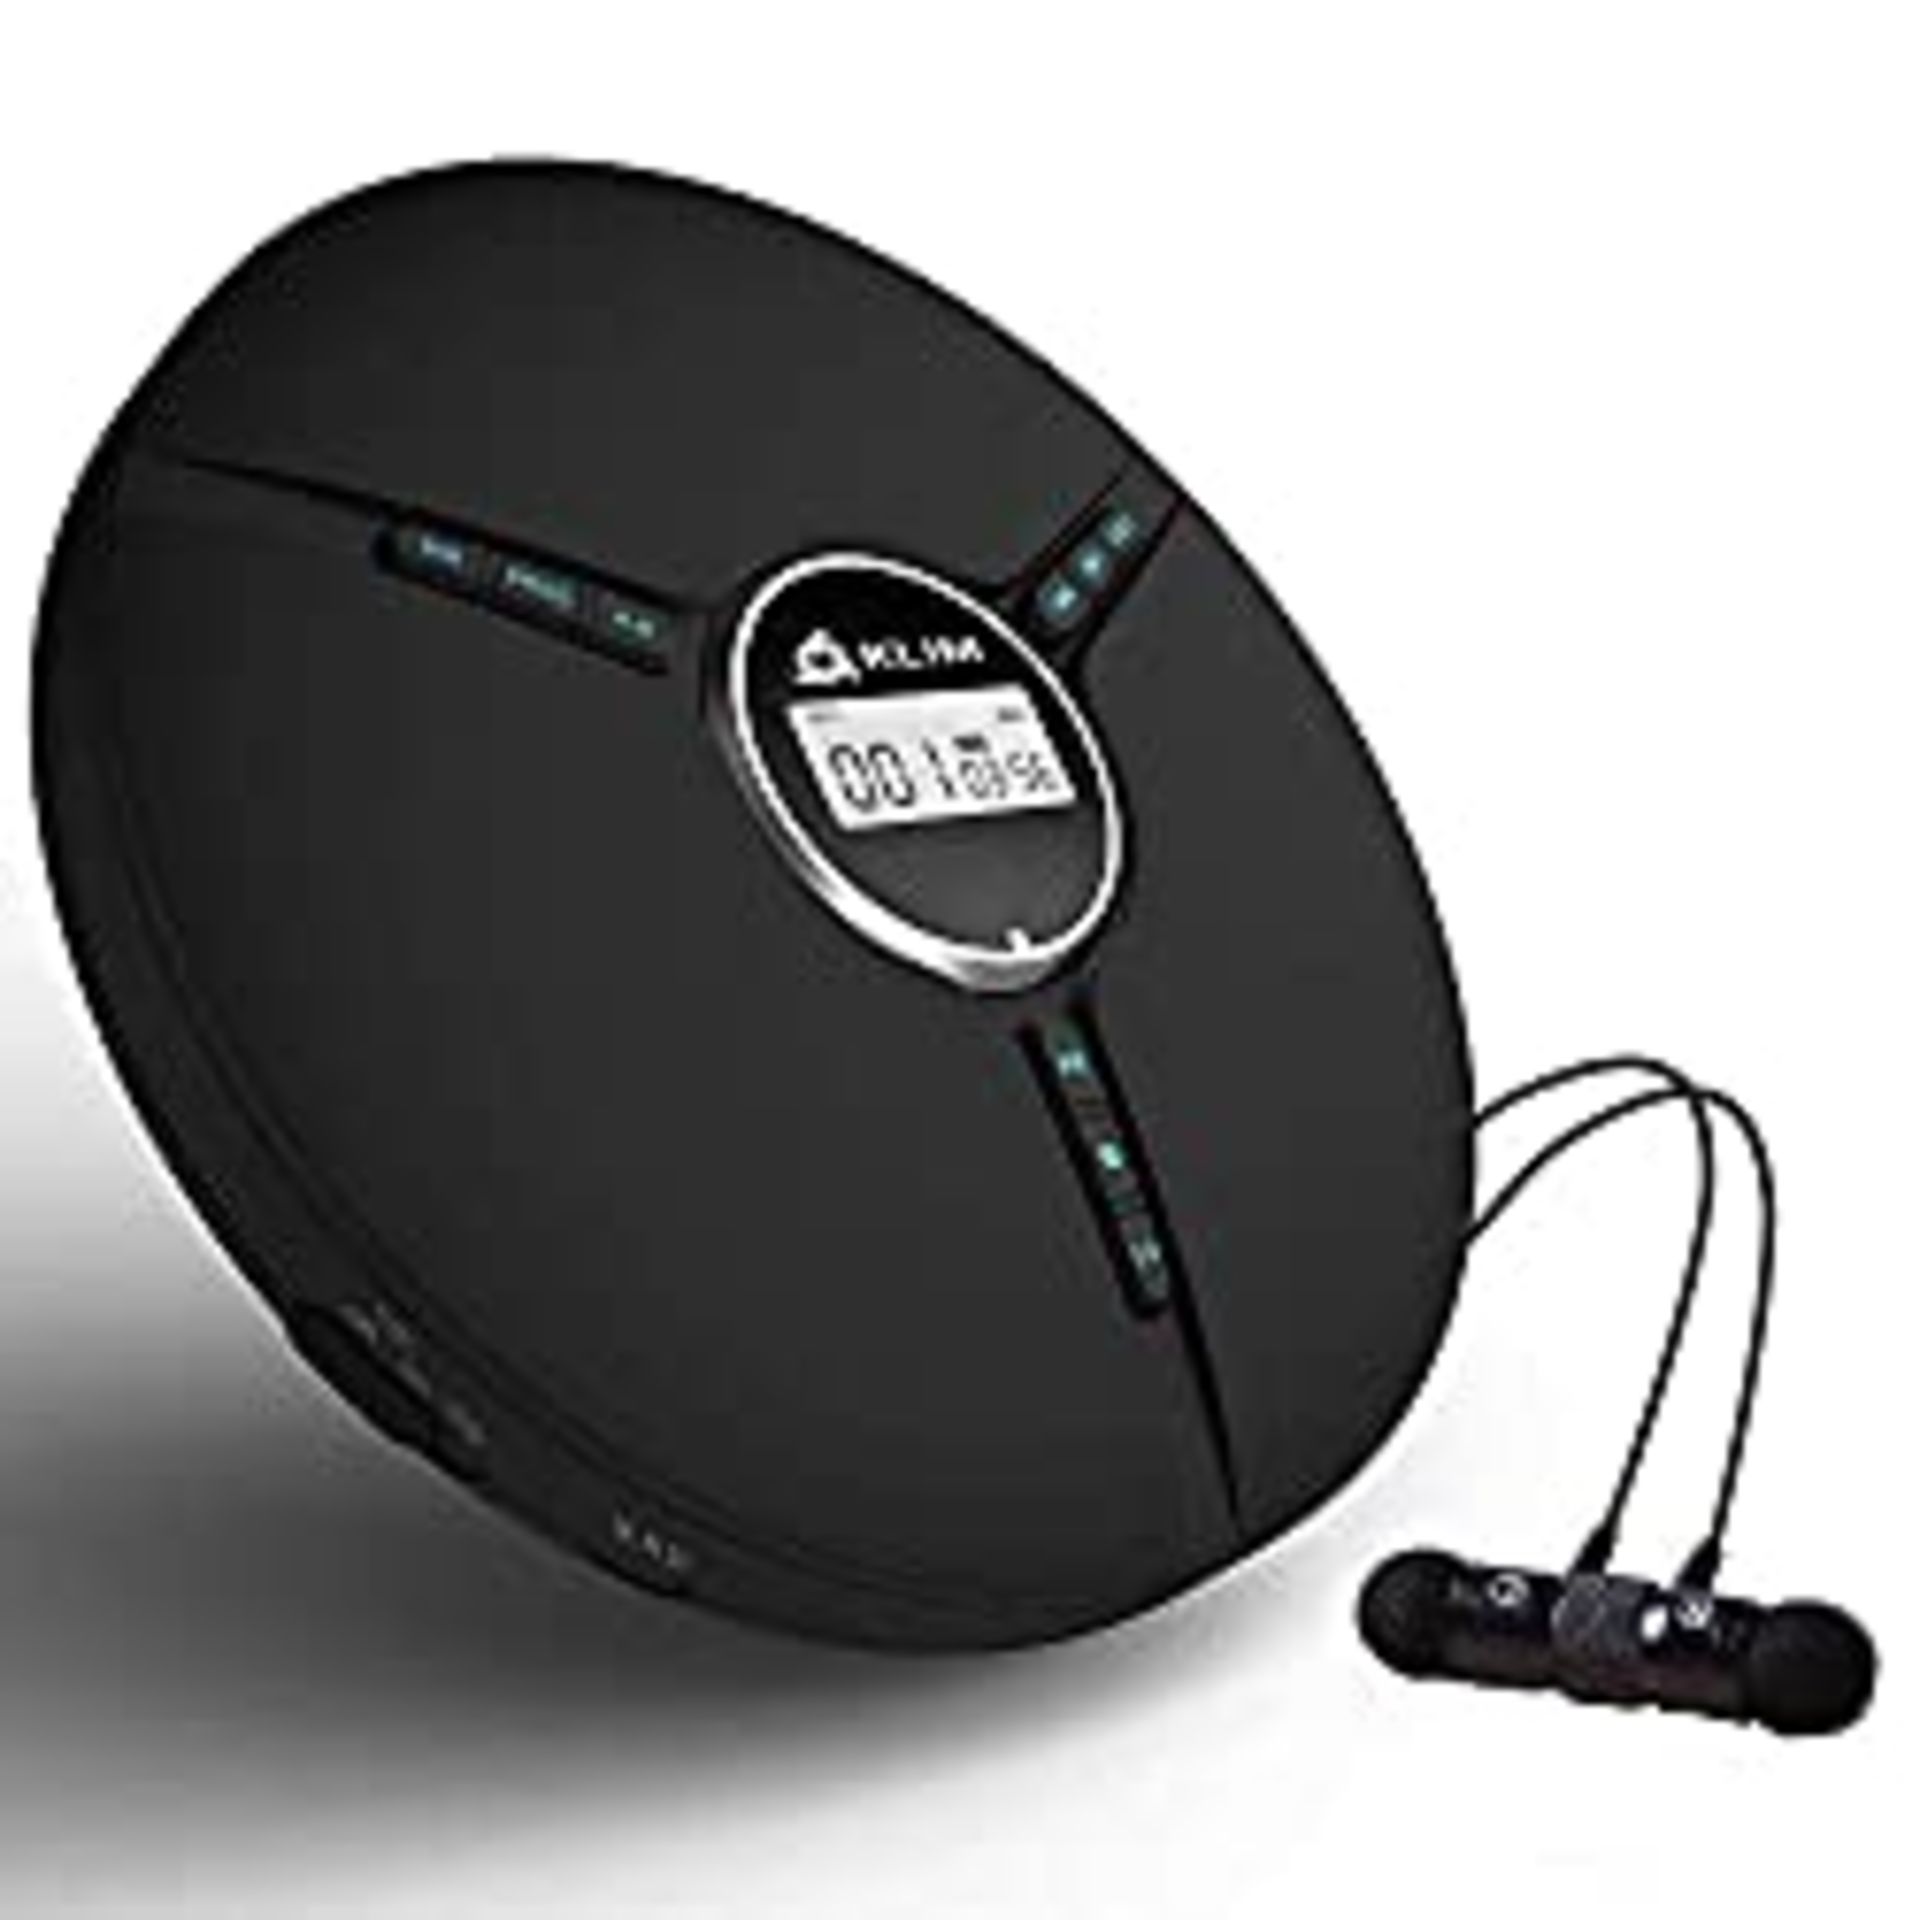 RRP £56.98 KLIM Discman Portable CD Player with a Built-in Battery